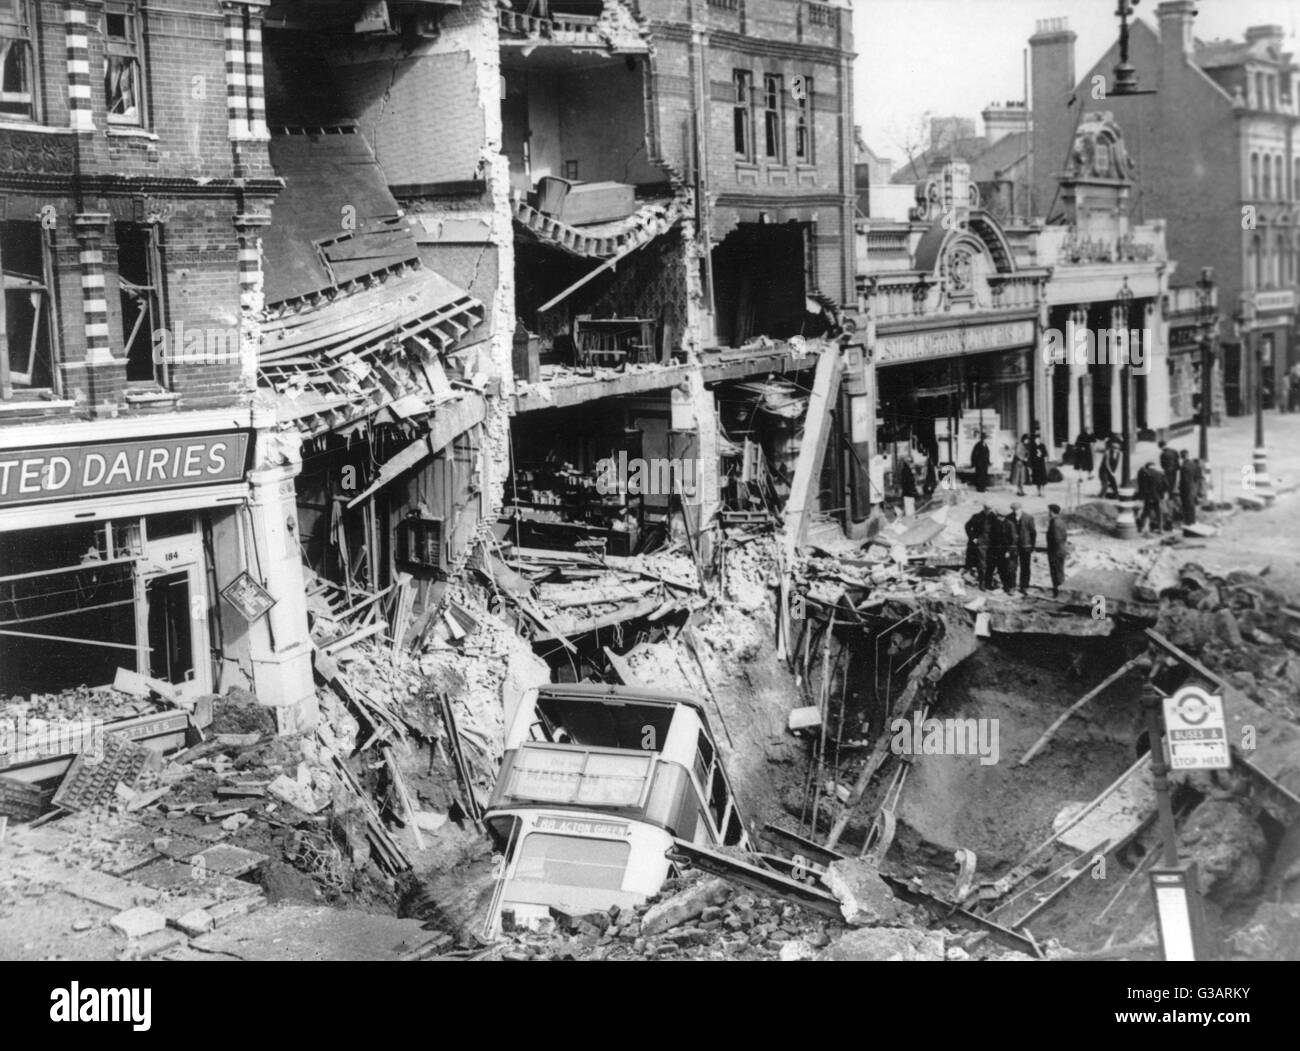 Blitz in London -- aftermath of bombing, with a row of ruined buildings, and a route 88 bus for Acton Green in a large crater in the road.      Date: 1940s Stock Photo